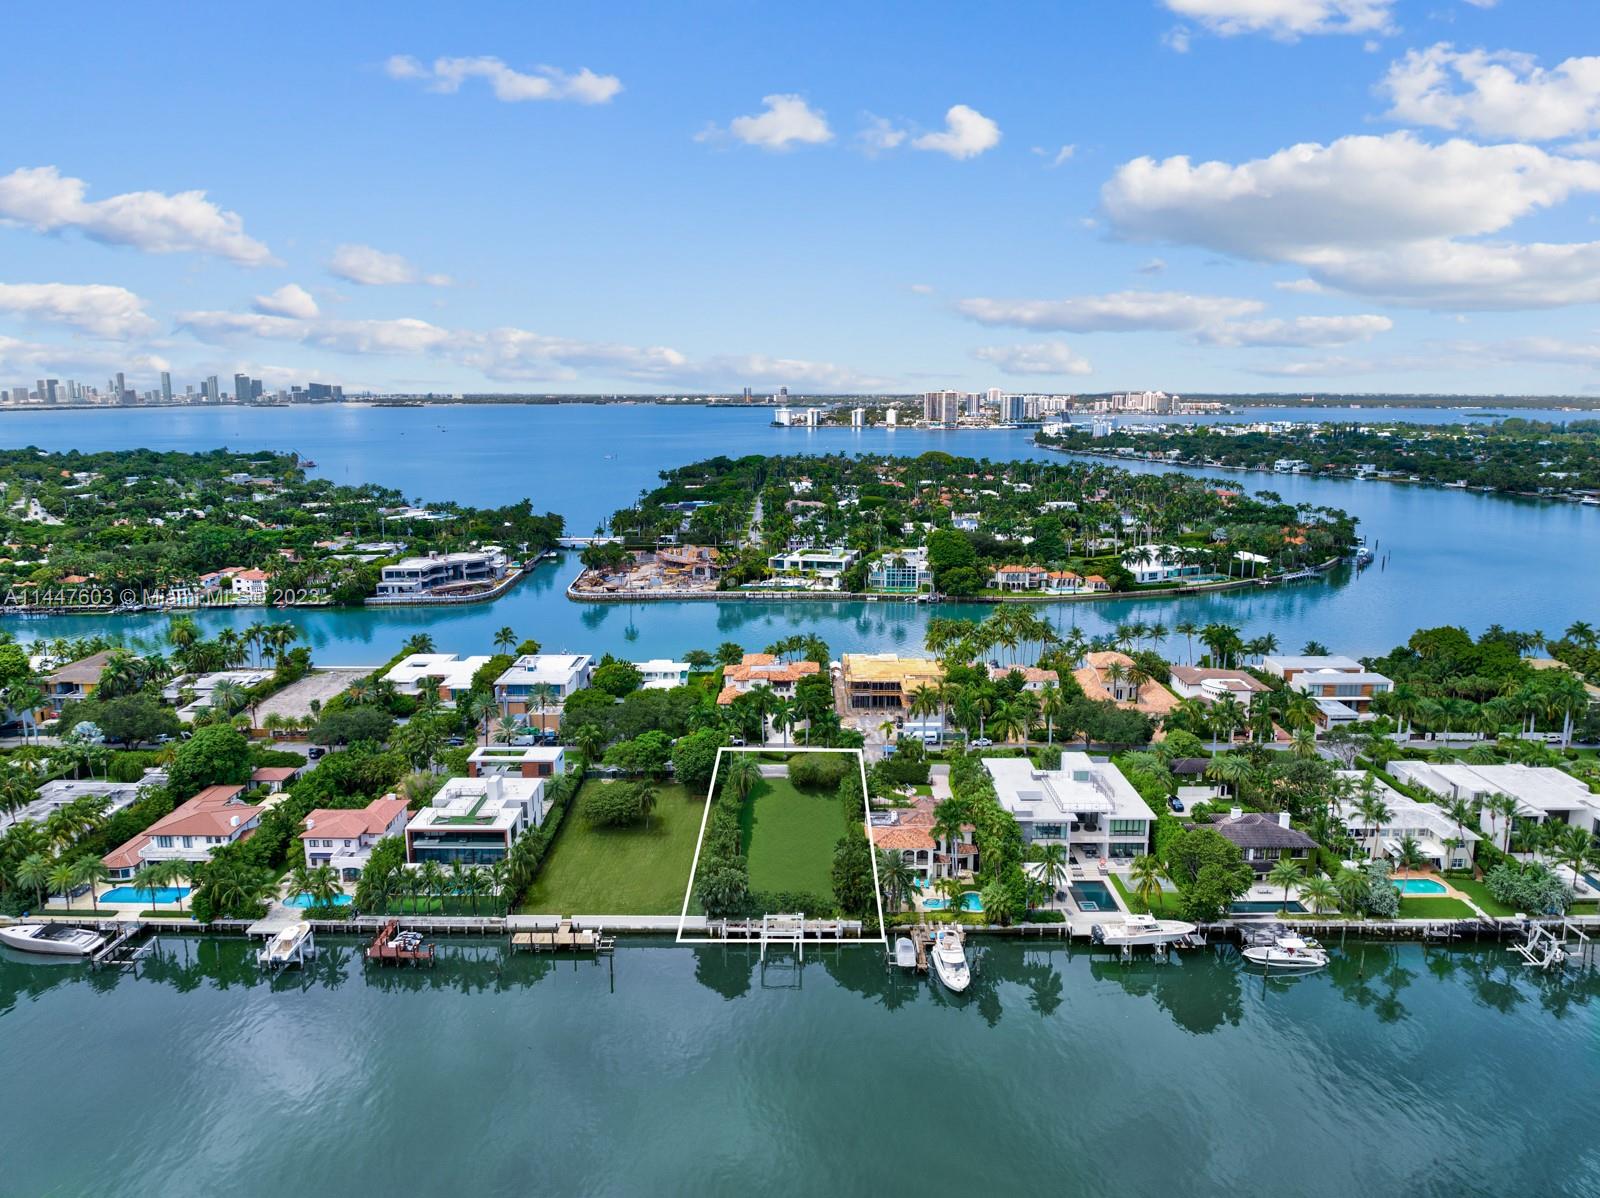 This exceptional property on Allison Island in Miami Beach presents a unique opportunity to build your dream home in one of the city's most exclusive gated communities. With breathtaking water views and stunning sunrises as your daily backdrop, this is a setting like no other. Included in this offering are fully permitted architectural plans by renowned architect Cesar Molina. These plans are designed for a modern tropical masterpiece boasting 7 bedrooms and 7 bathrooms, spread across 8,000 square feet of luxurious interior space. With a generous 16,200-square-foot lot, this property boasts an impressive 75 feet of water frontage along with a brand-new seawall, dock and lift . You'll have direct access to the water, making it perfect for water enthusiasts and boaters..